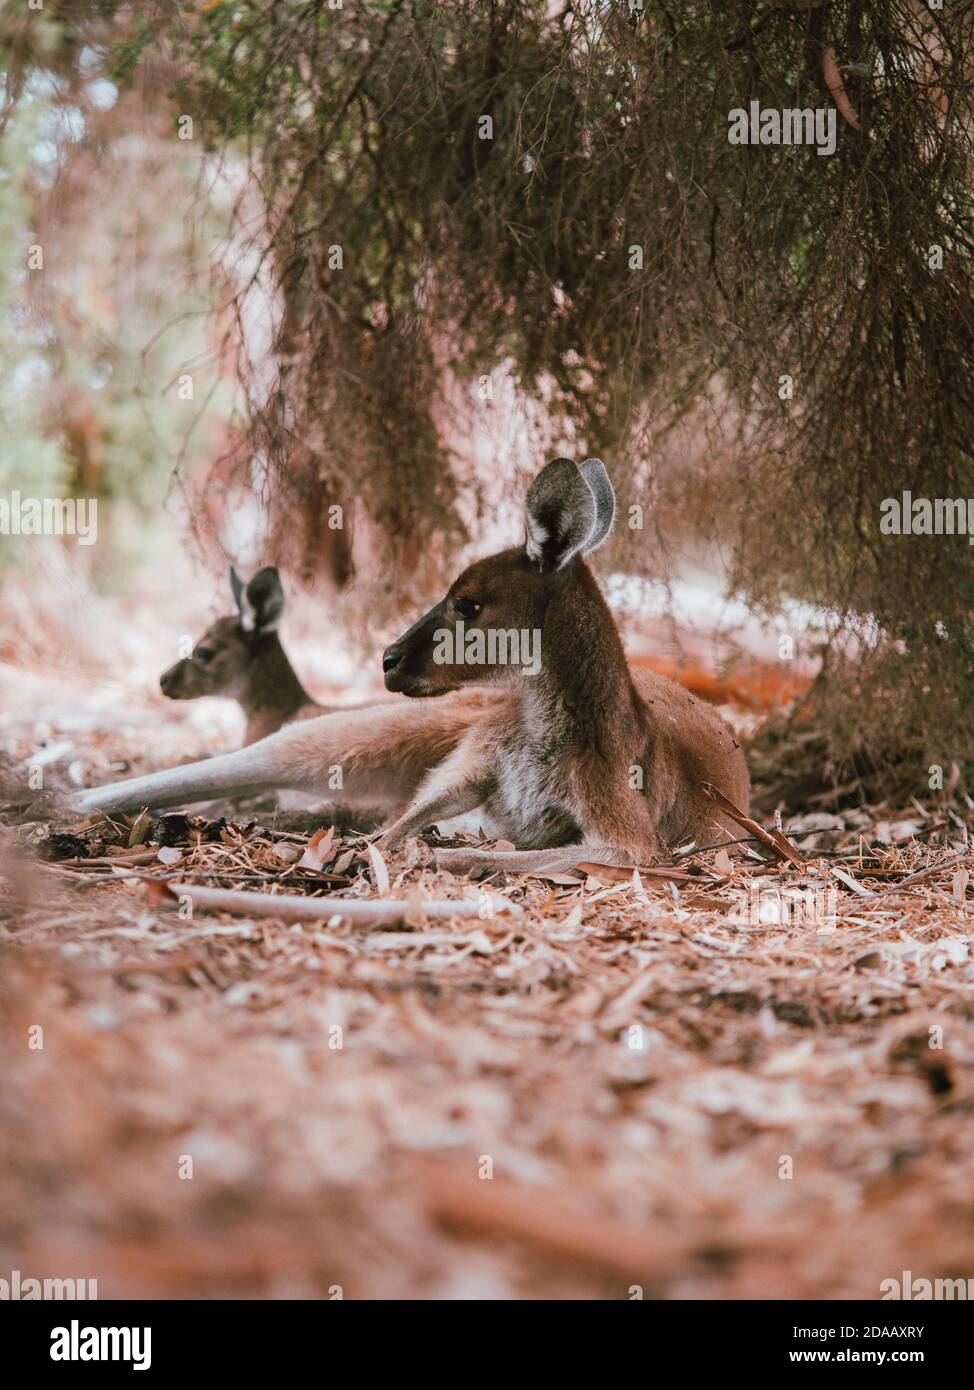 Some Wild Kangaroo in Perth, Australia, resting amongst some trees in the summer. Stock Photo